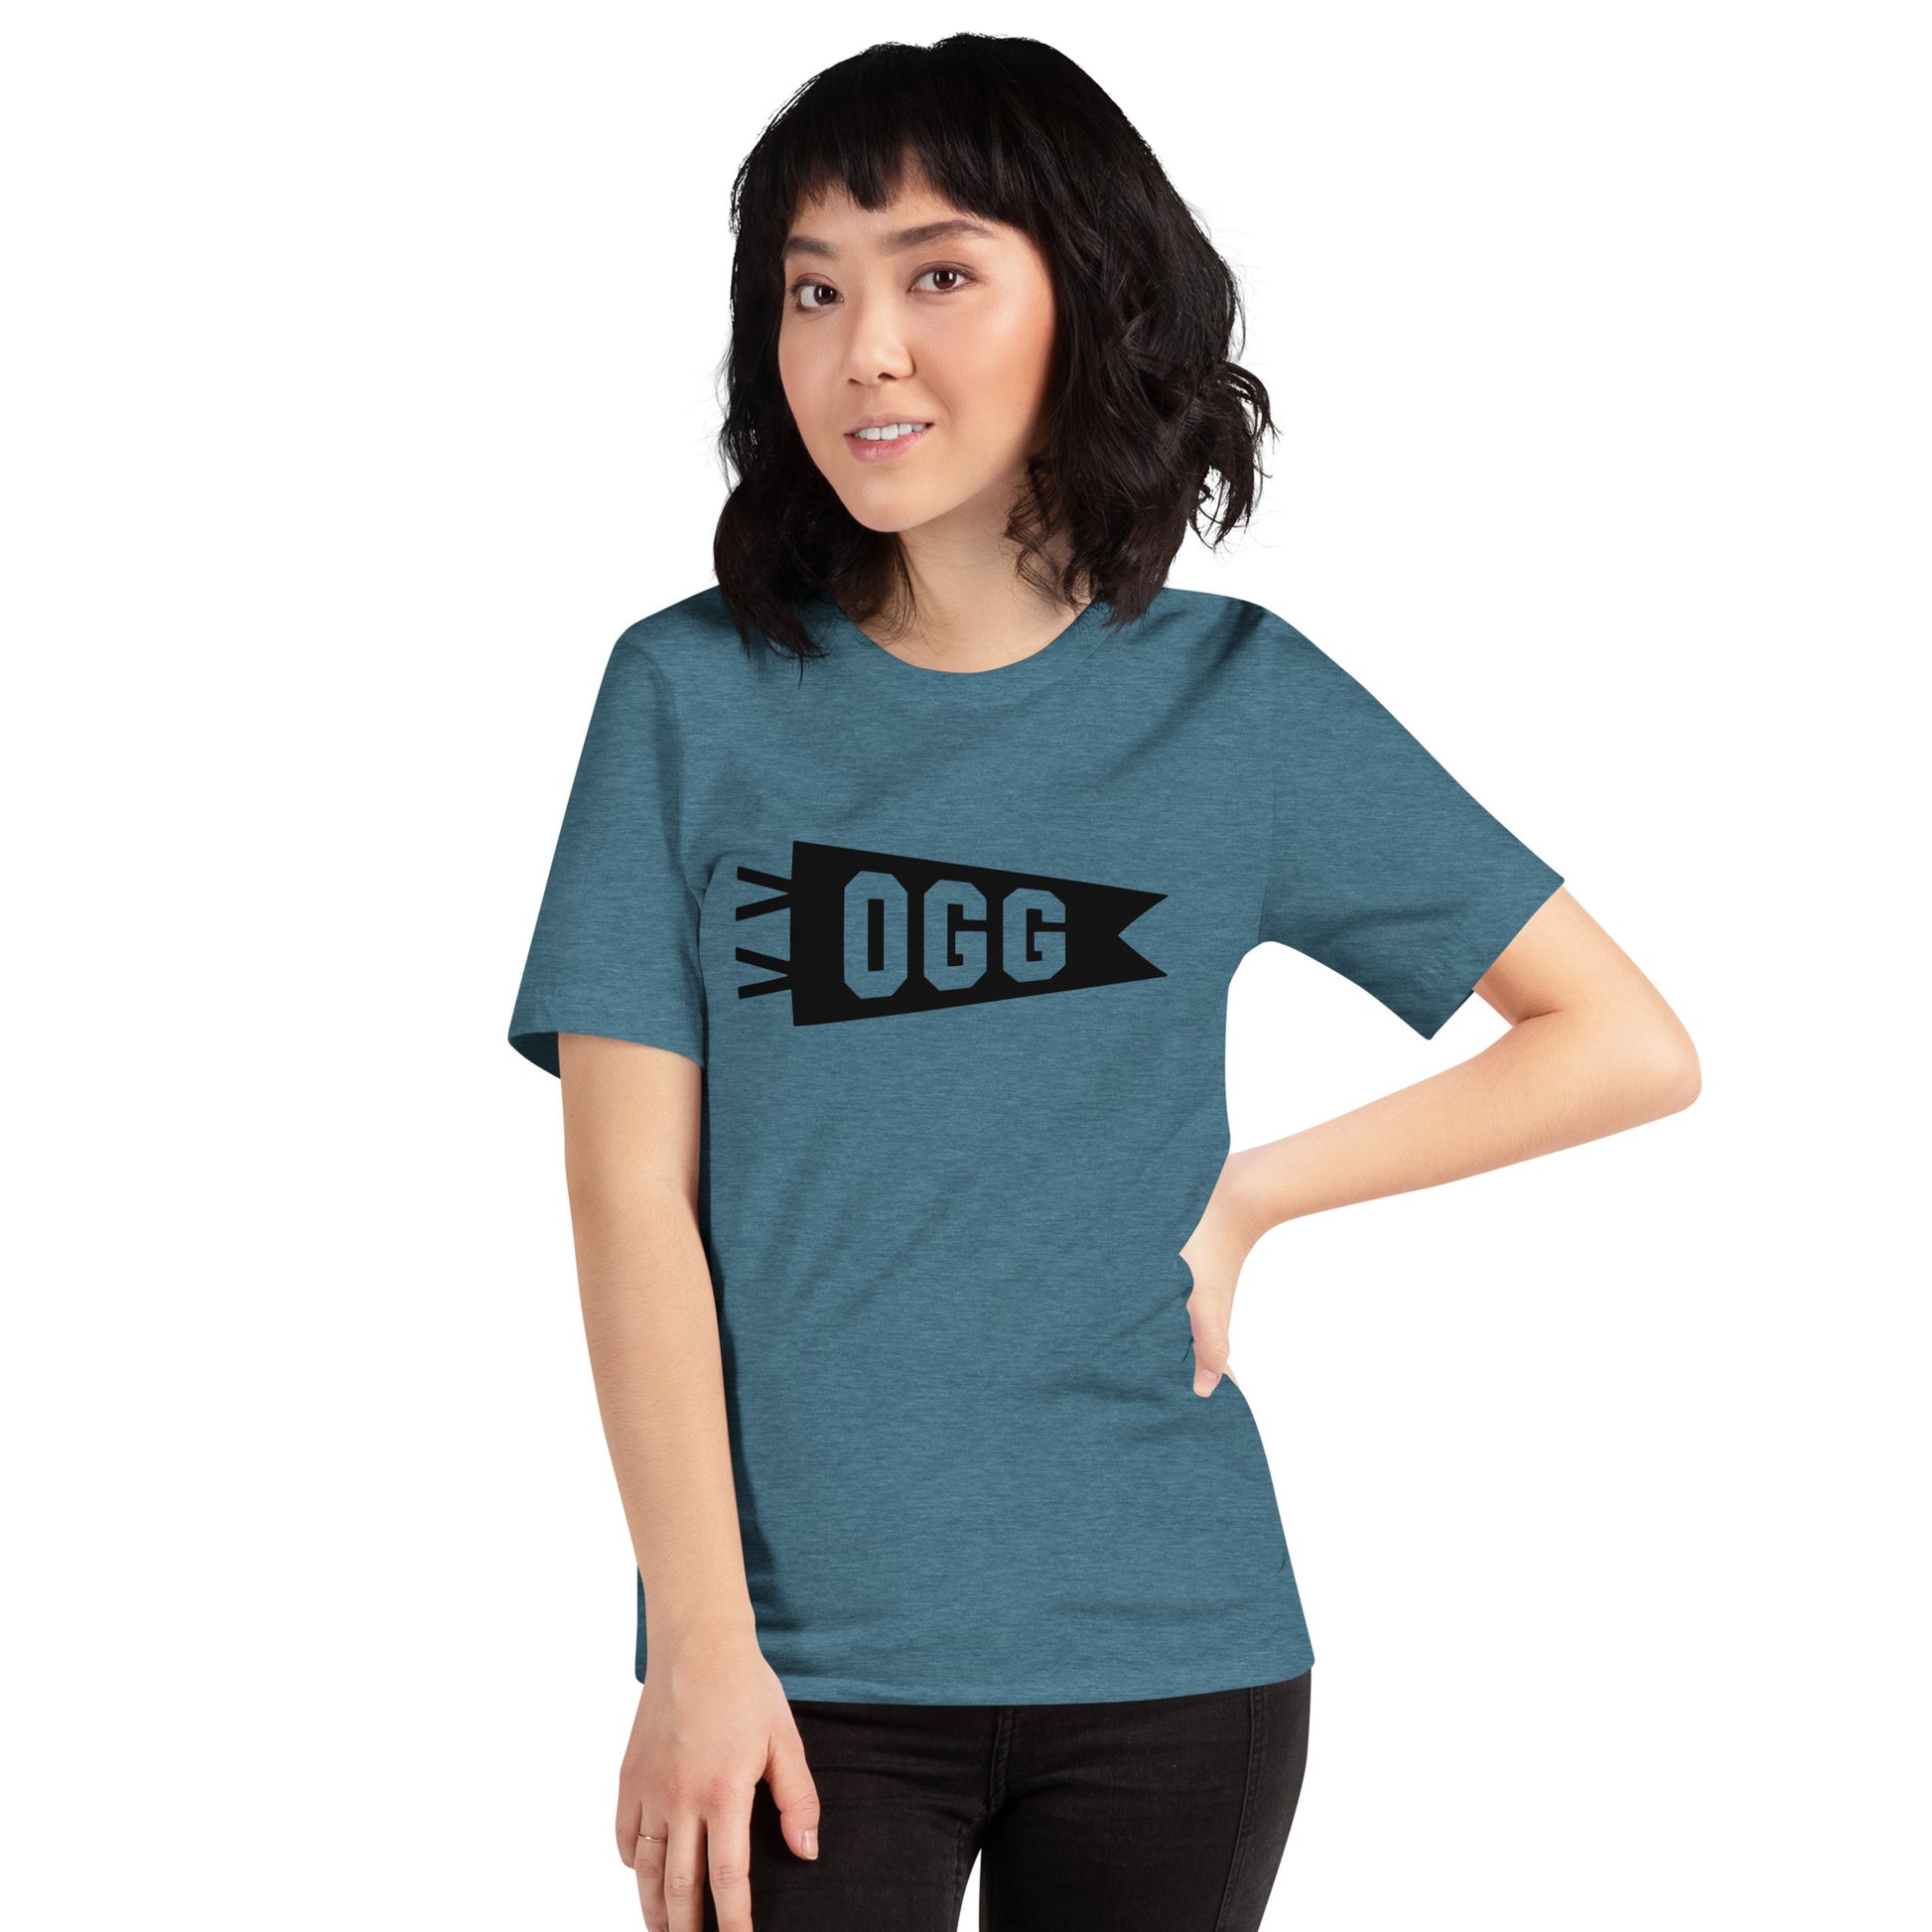 Airport Code T-Shirt - Black Graphic • OGG Maui • YHM Designs - Image 05